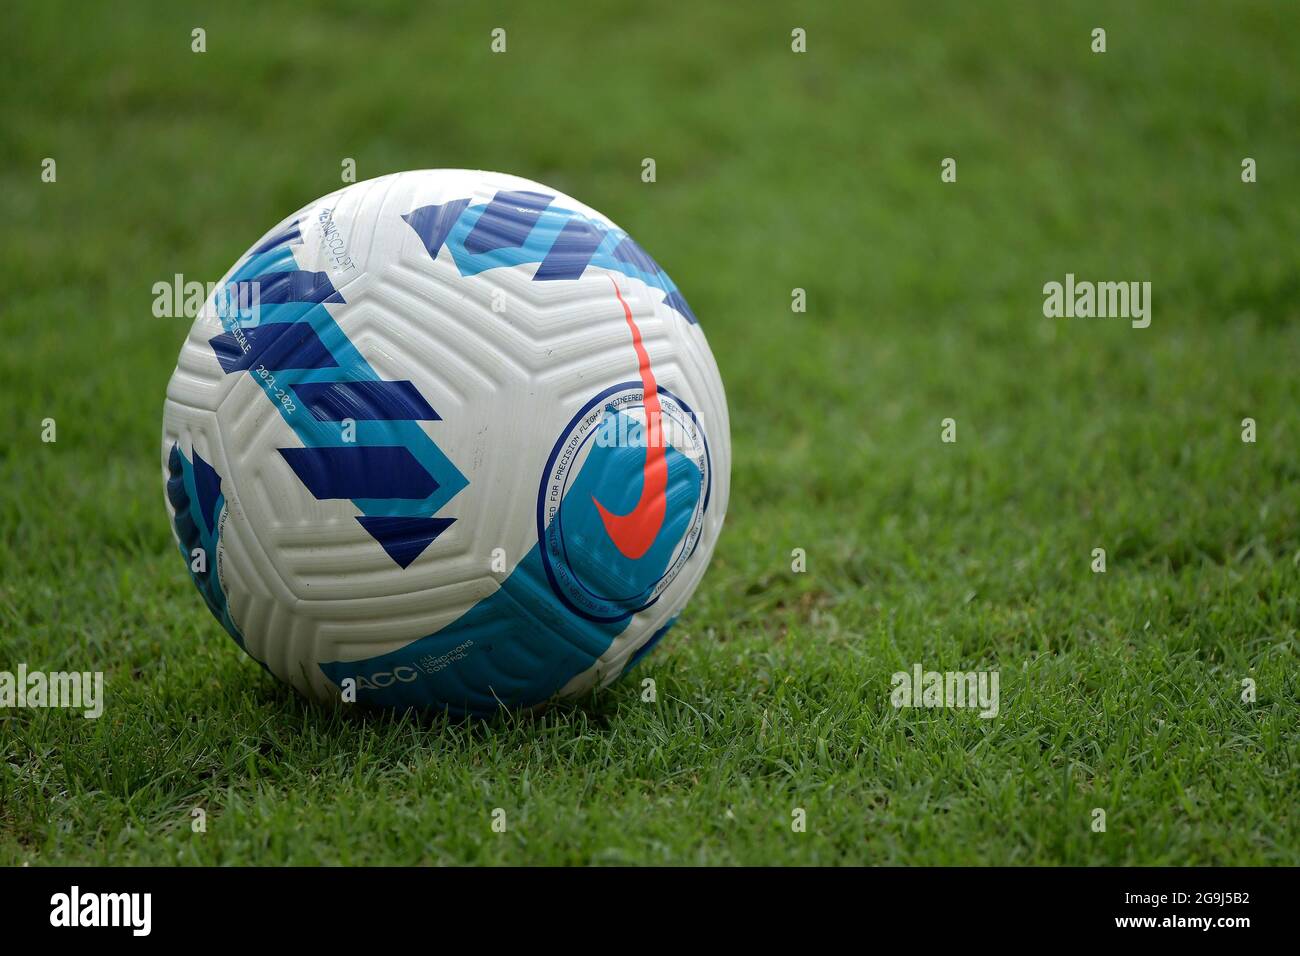 Frosinone, Italy. 25th July, 2021. Serie A Nike official ball, named  flight, is seen on the pitch during the pre season friendly football match  between AS Roma and Debrecen at Benito Stirpe